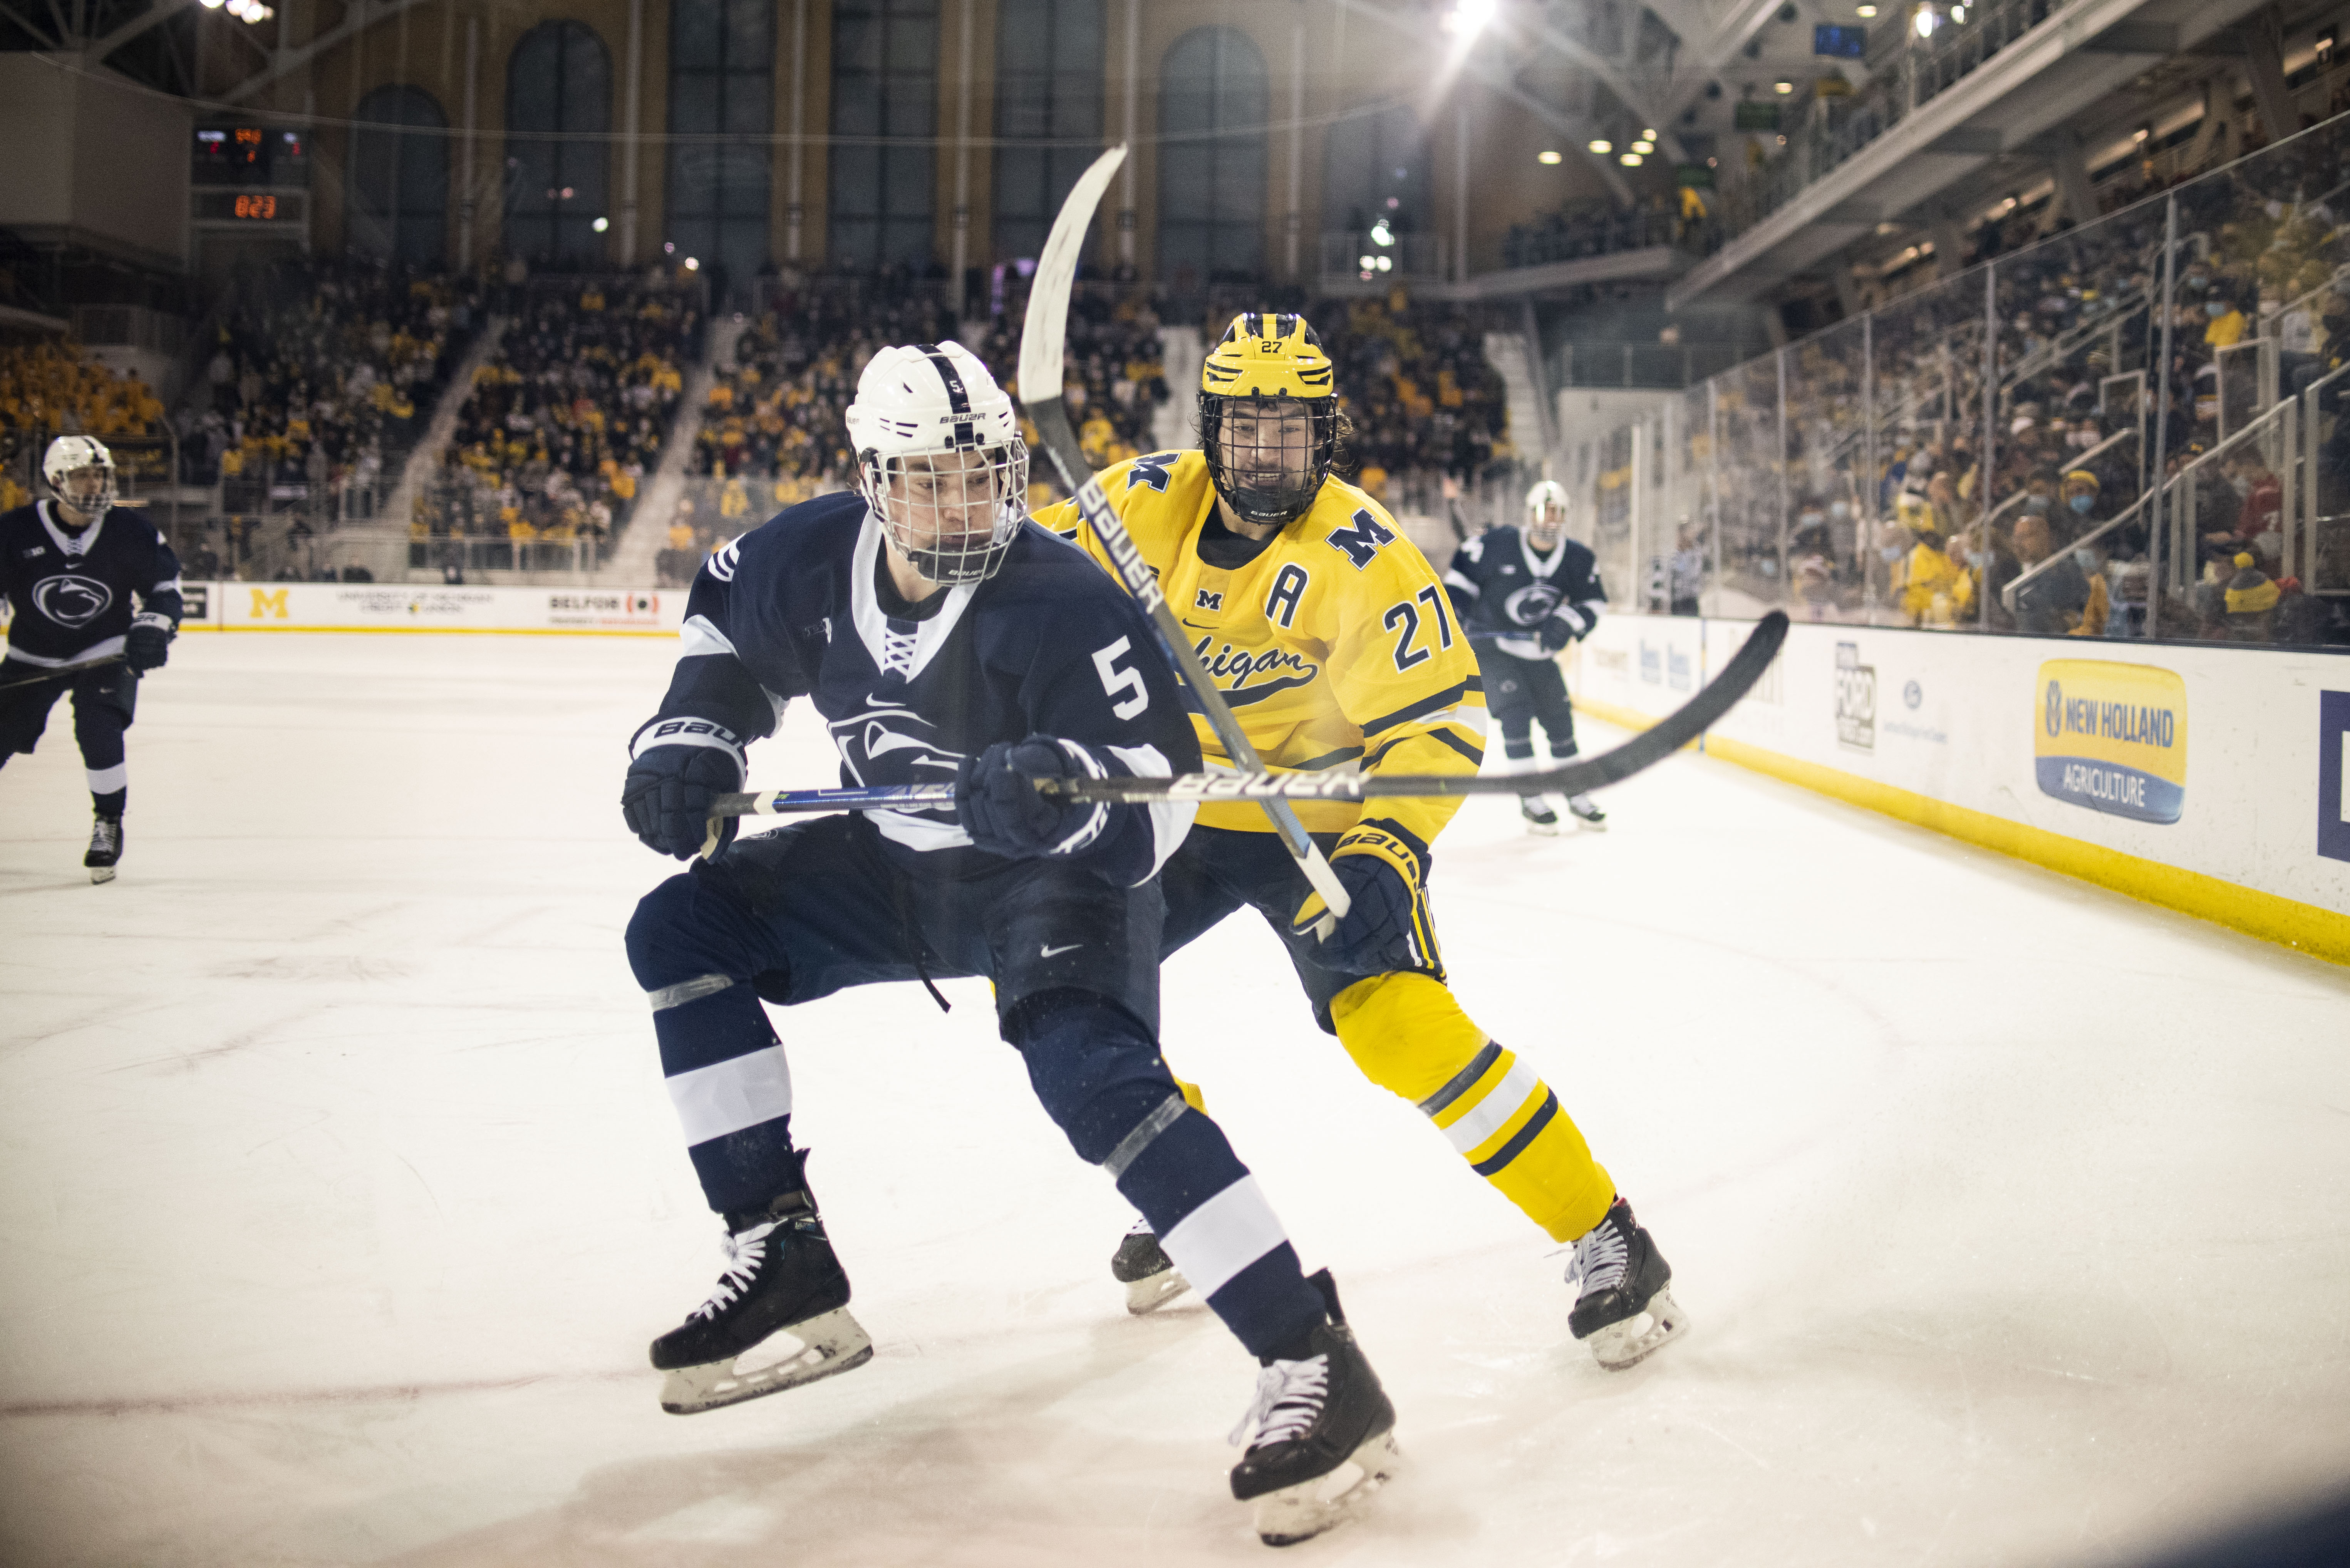 Michigan hockey overwhelmed, downed 3-0 by Penn State